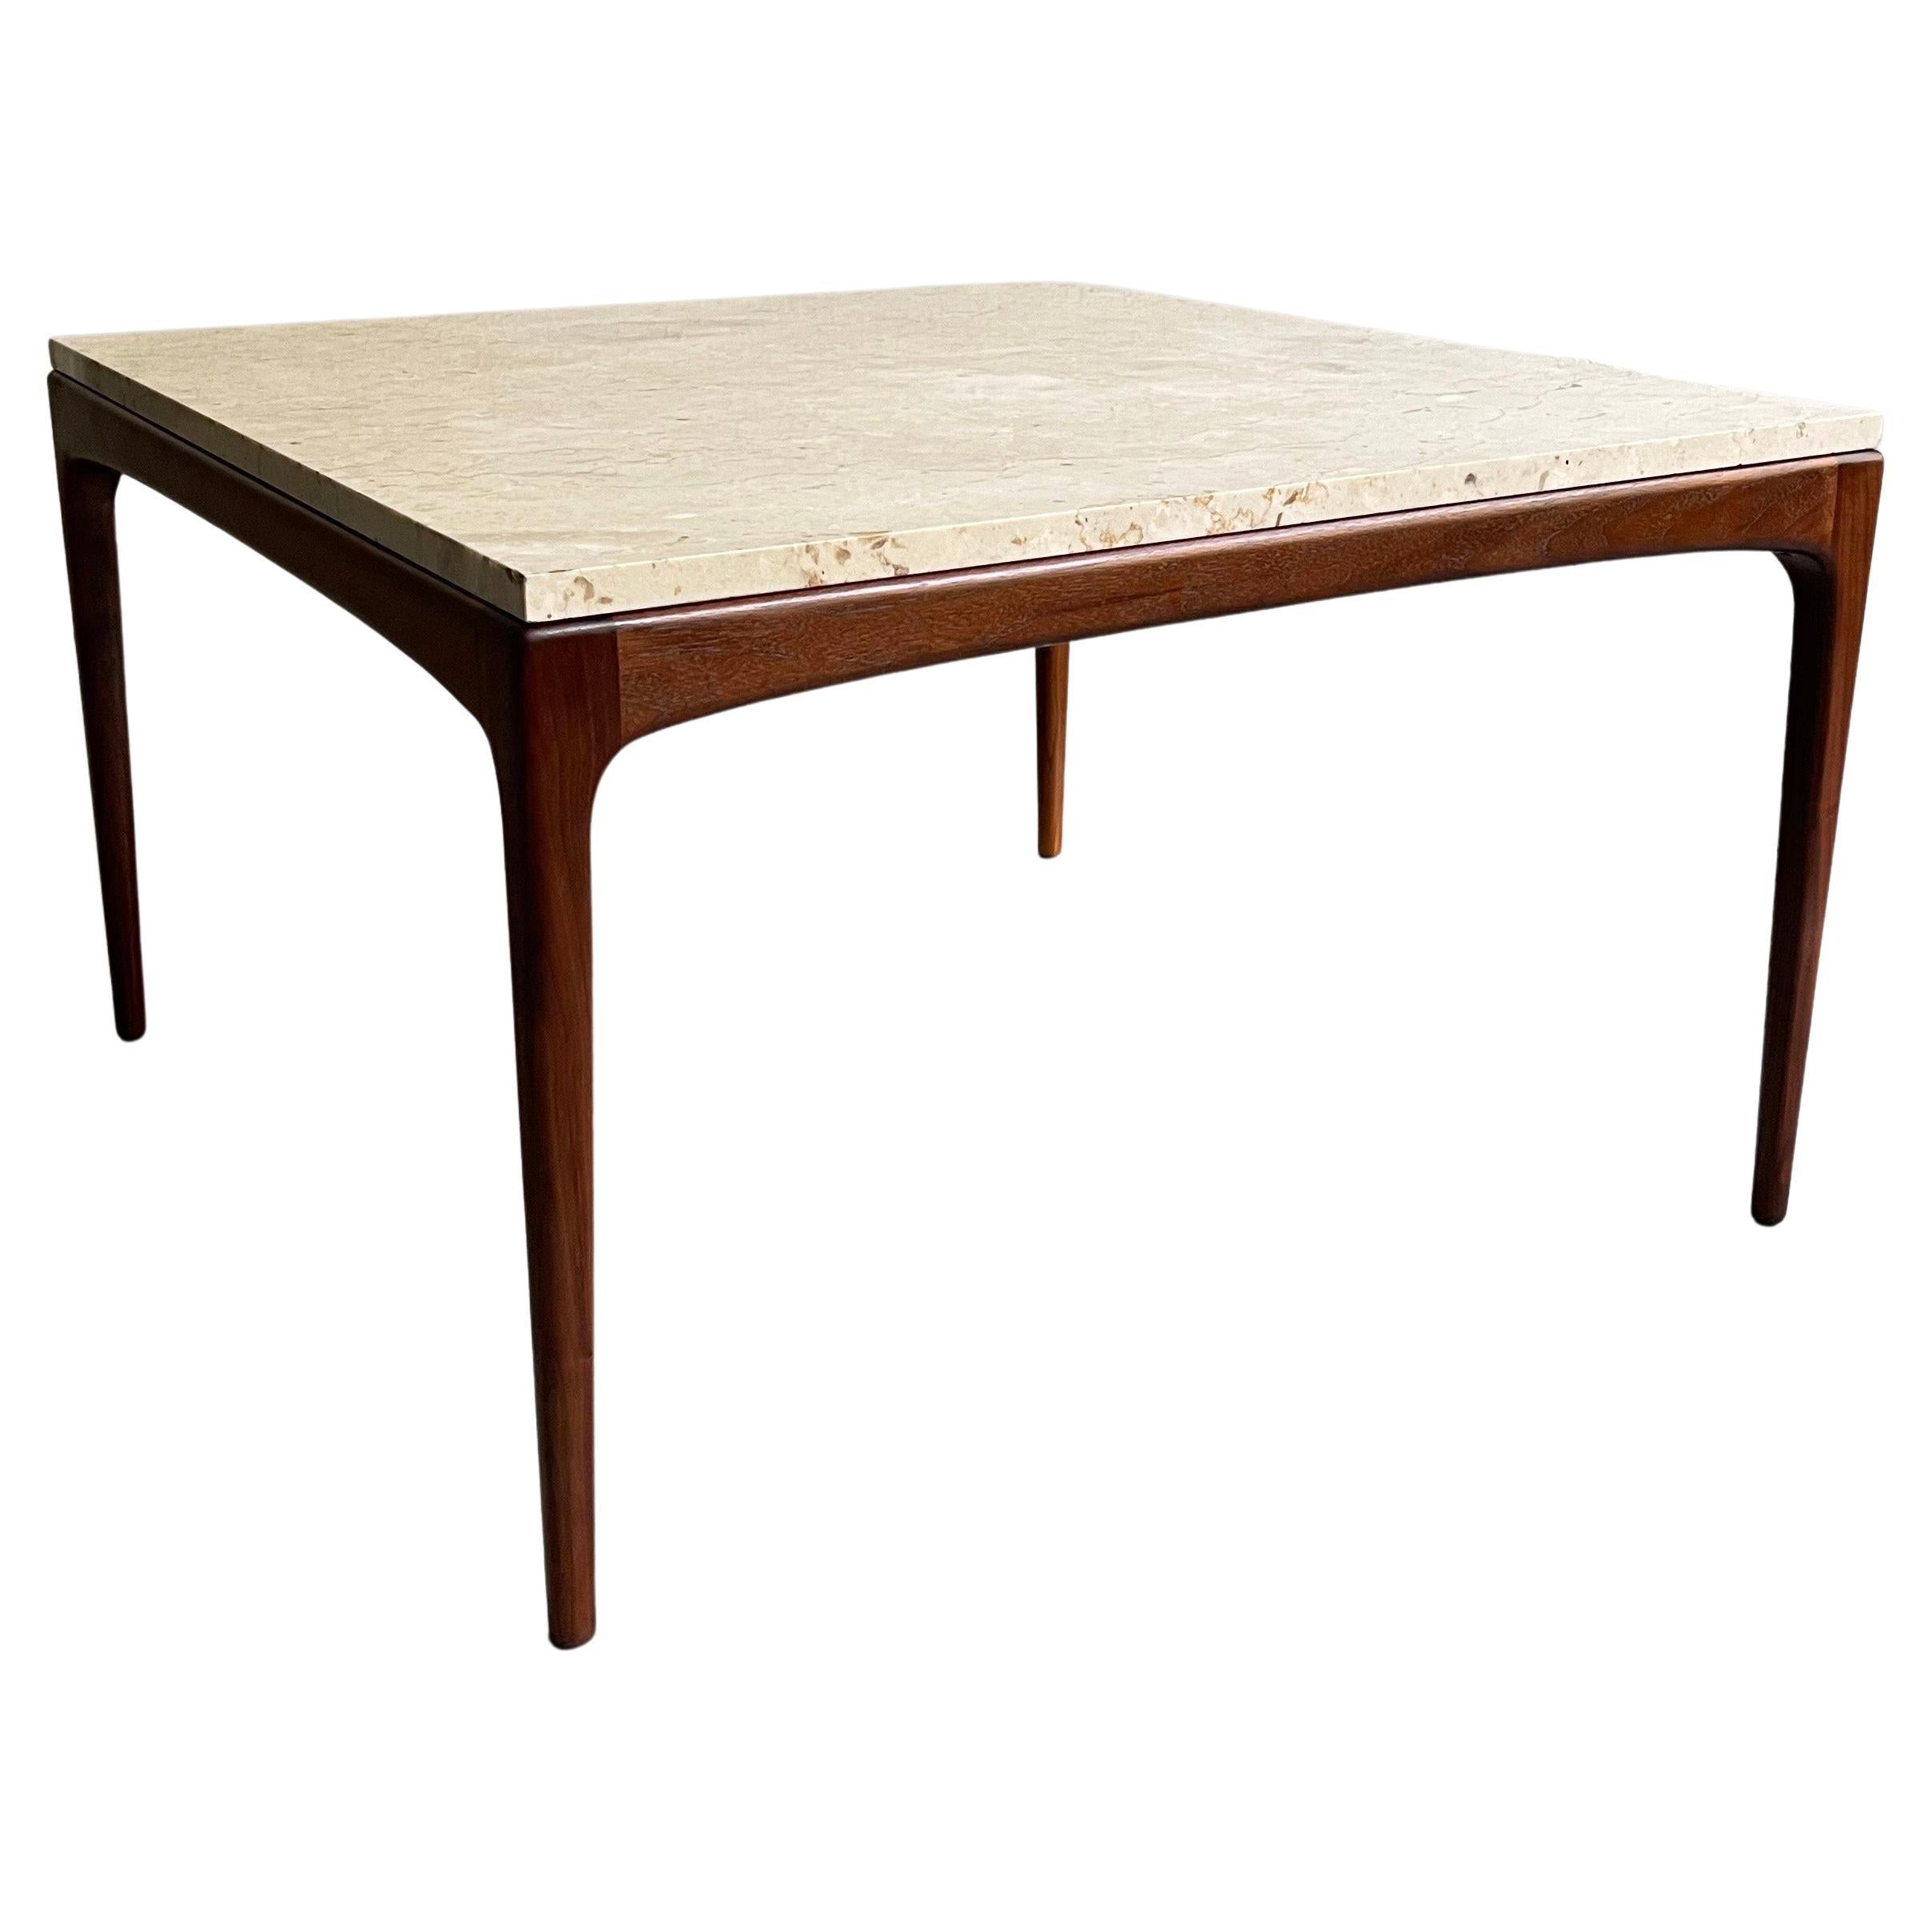 Scandinavian Modern Teak and Marble Coffee Table For Sale